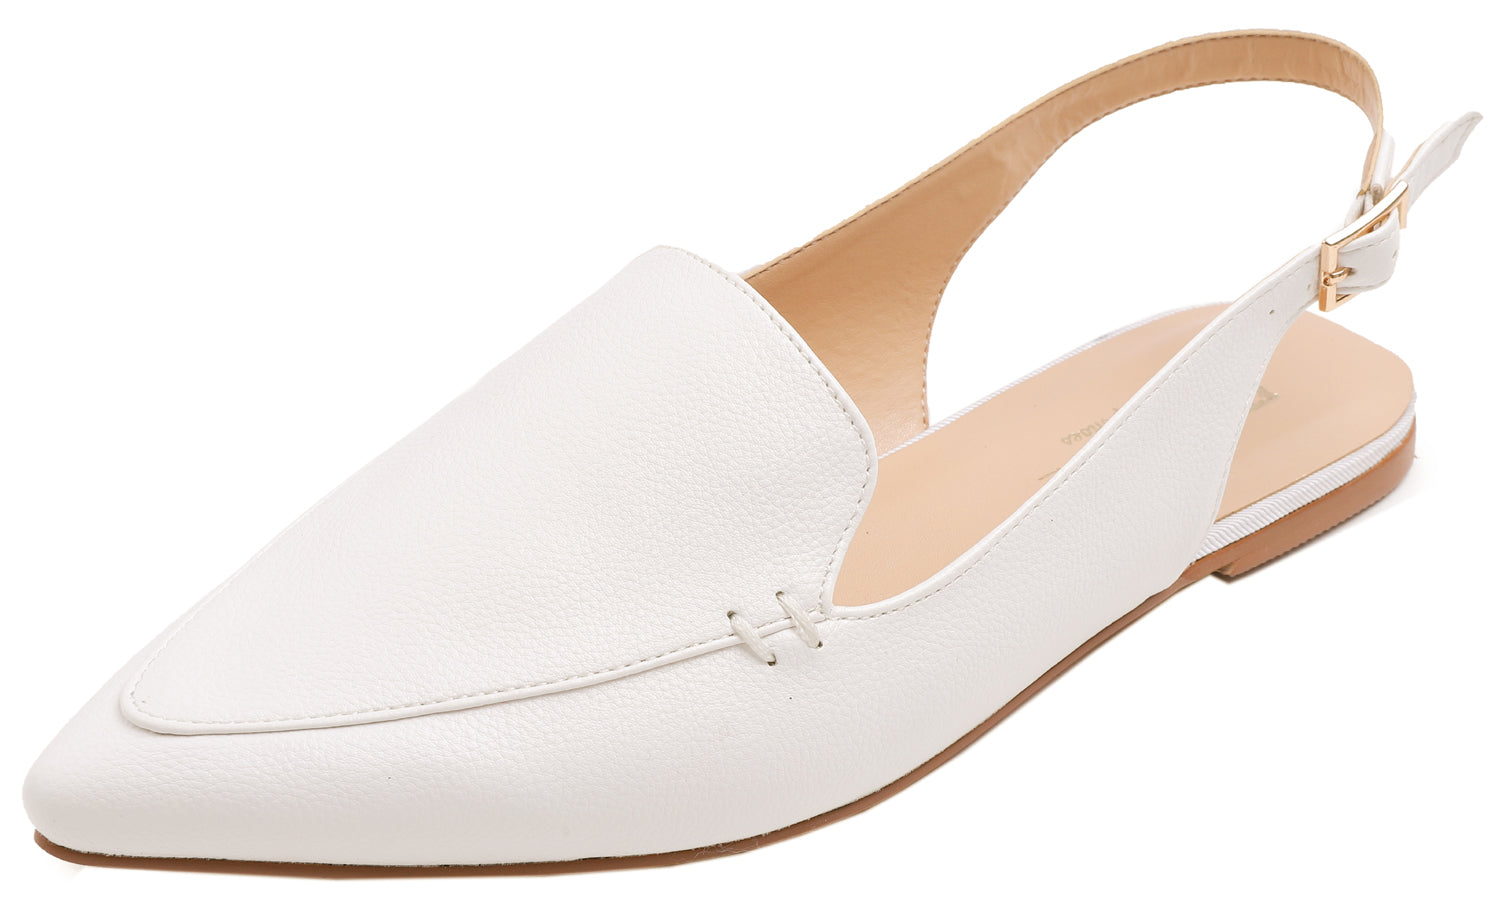 Feversole Pointed Toe Casual Slingback Flat Mules Women's White Vegan Leather Summer Slippers